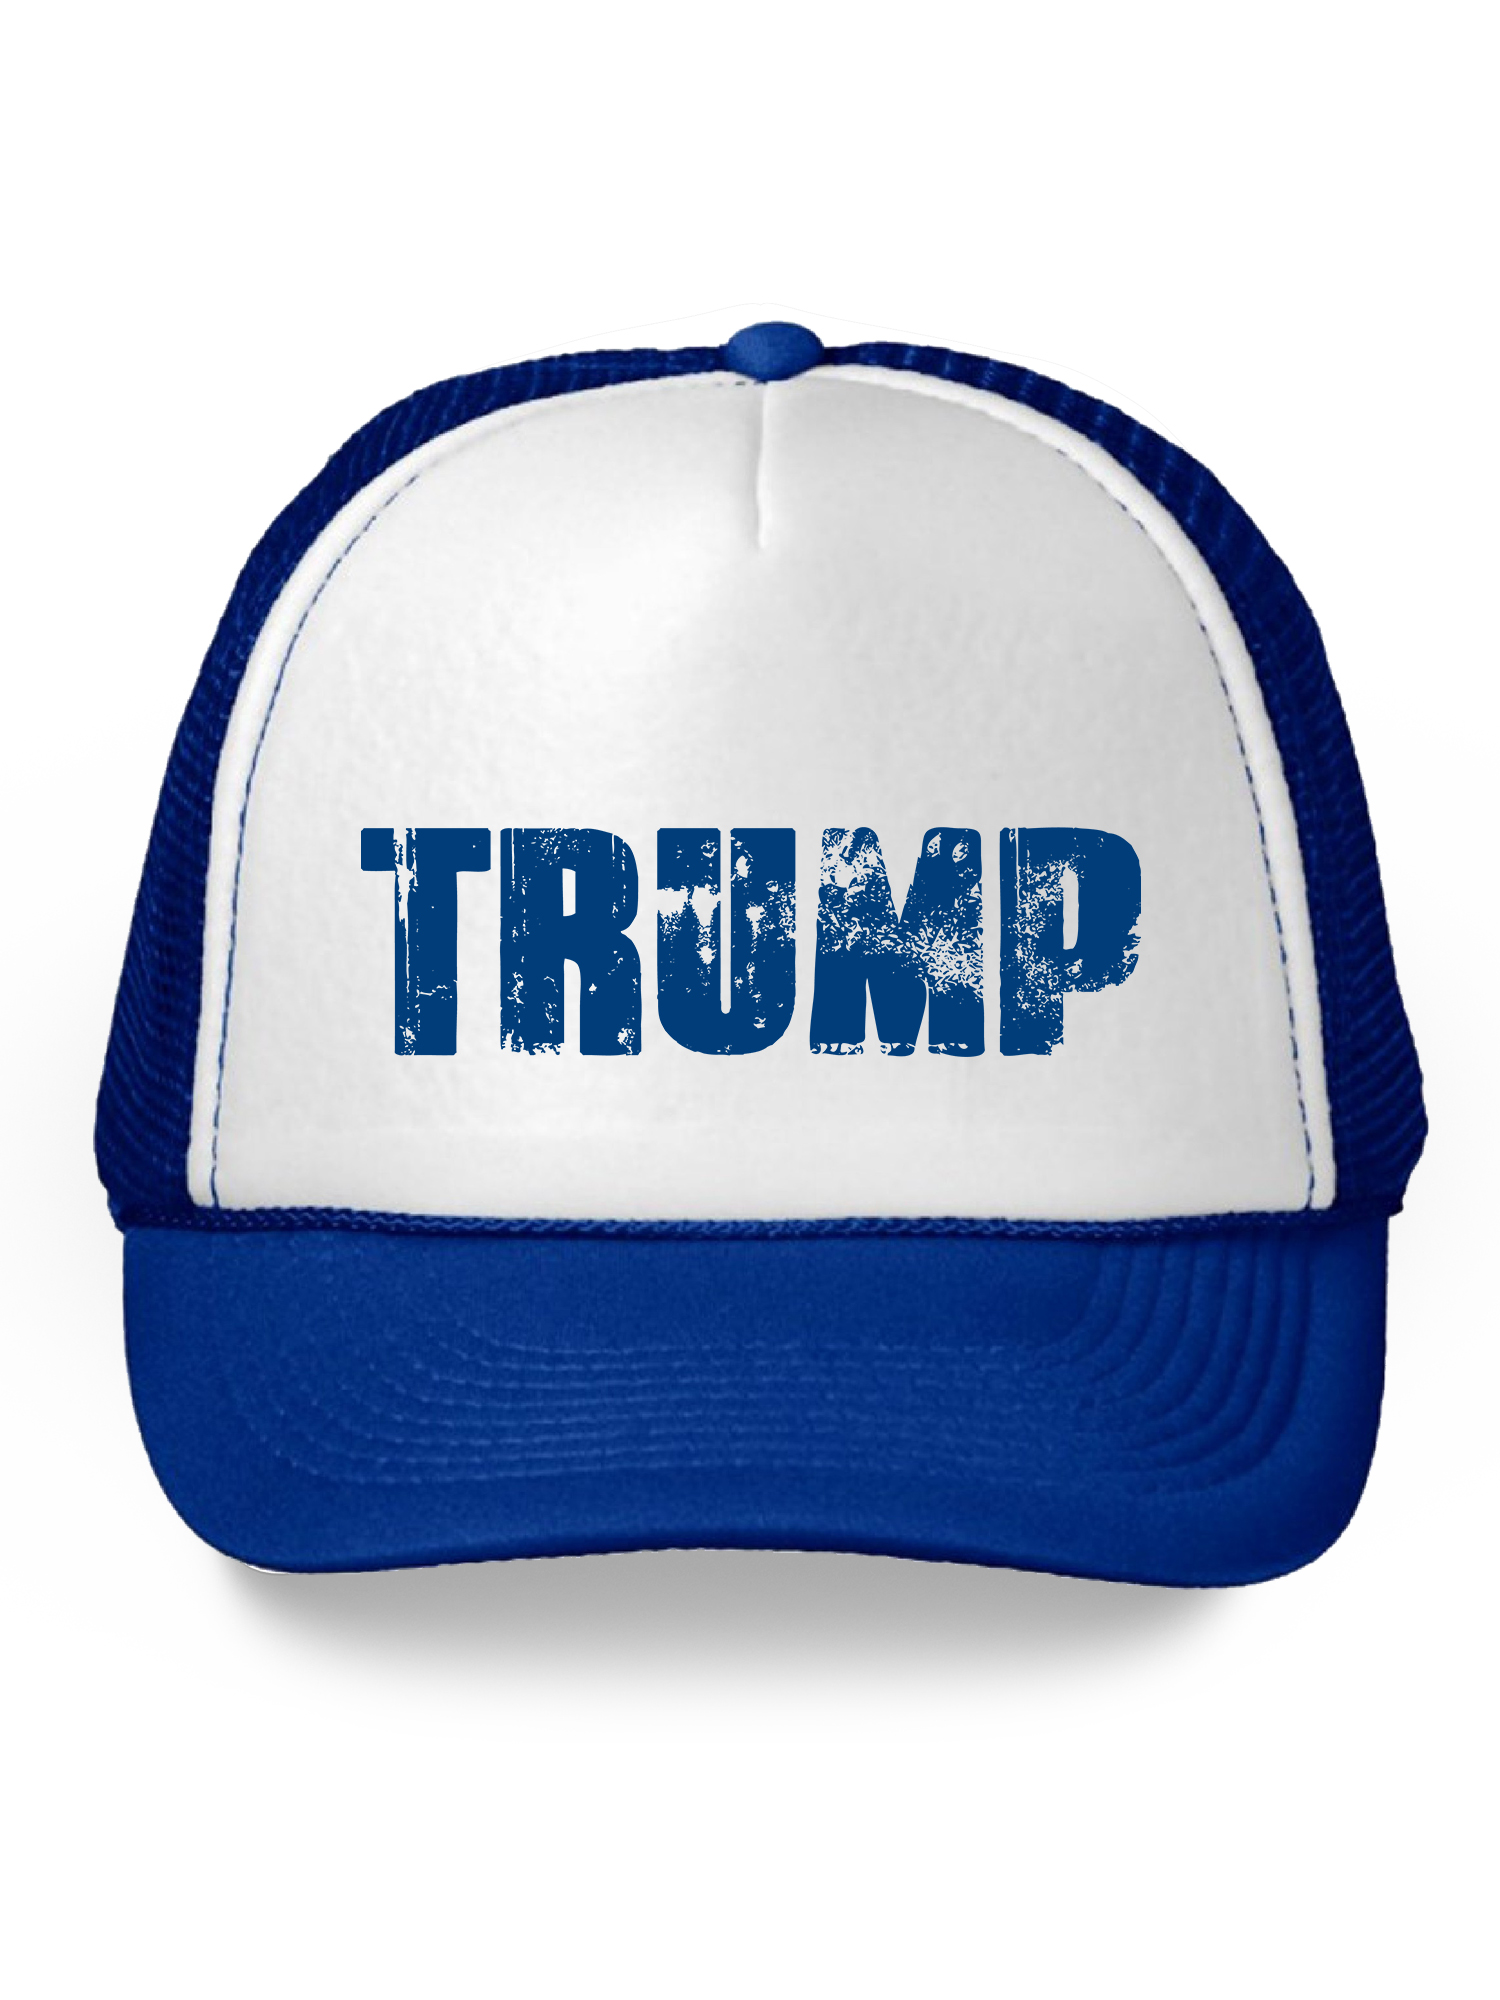 Awkward Styles Another Trump Hat Funny Trump Trucker Hats President Trump Gifts Republican Campaign Hats Keep America Great Trump 2020 Snapback Hats Political Baseball Caps USA Trump Hat Unisex - image 1 of 6